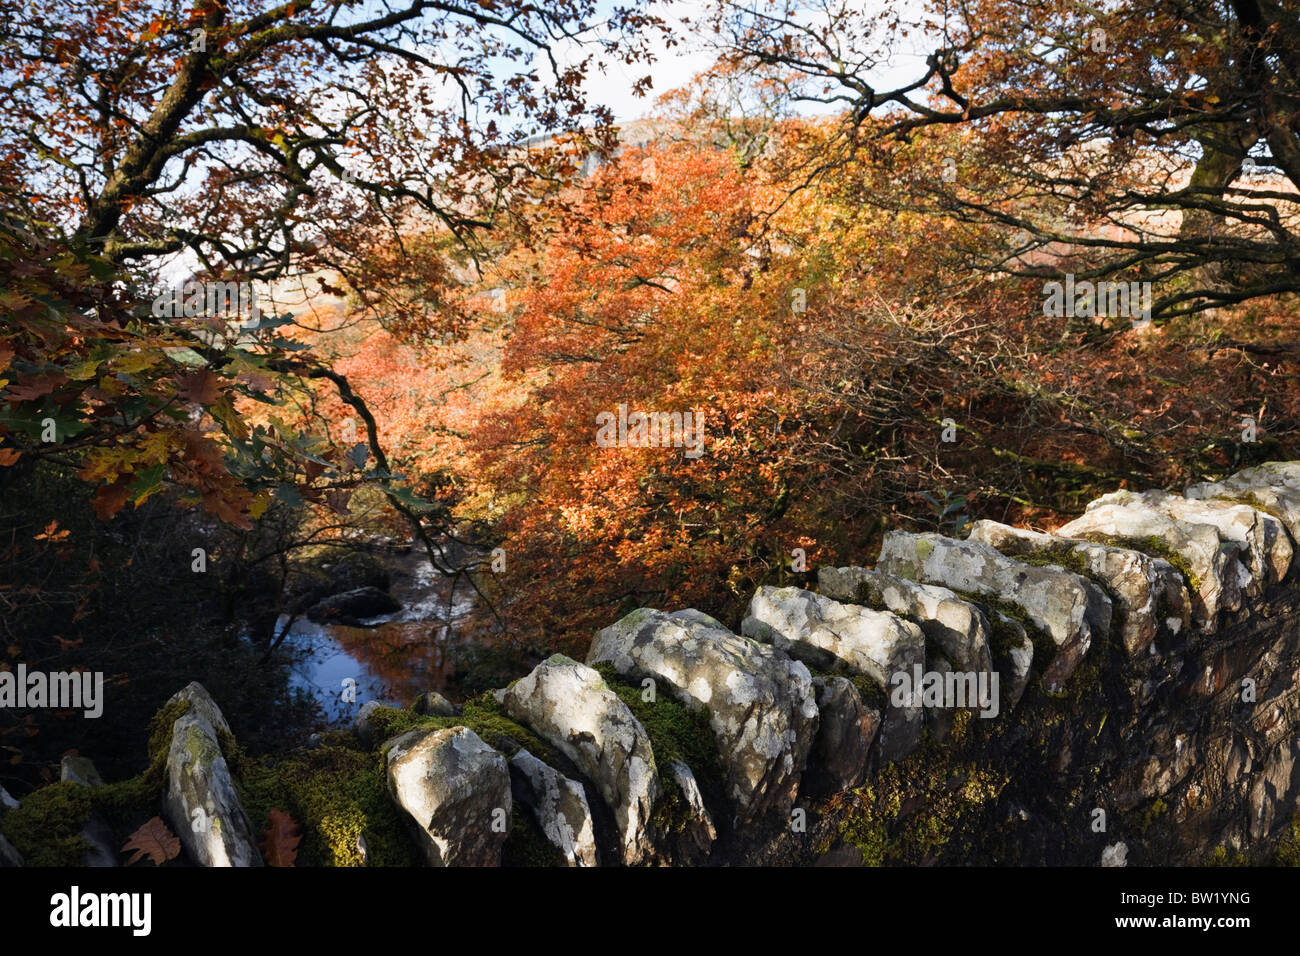 Capel Curig, Conwy, North Wales, UK. Stone wall on bridge over Afon Llugwy River with trees in autumn colours in Snowdonia Stock Photo